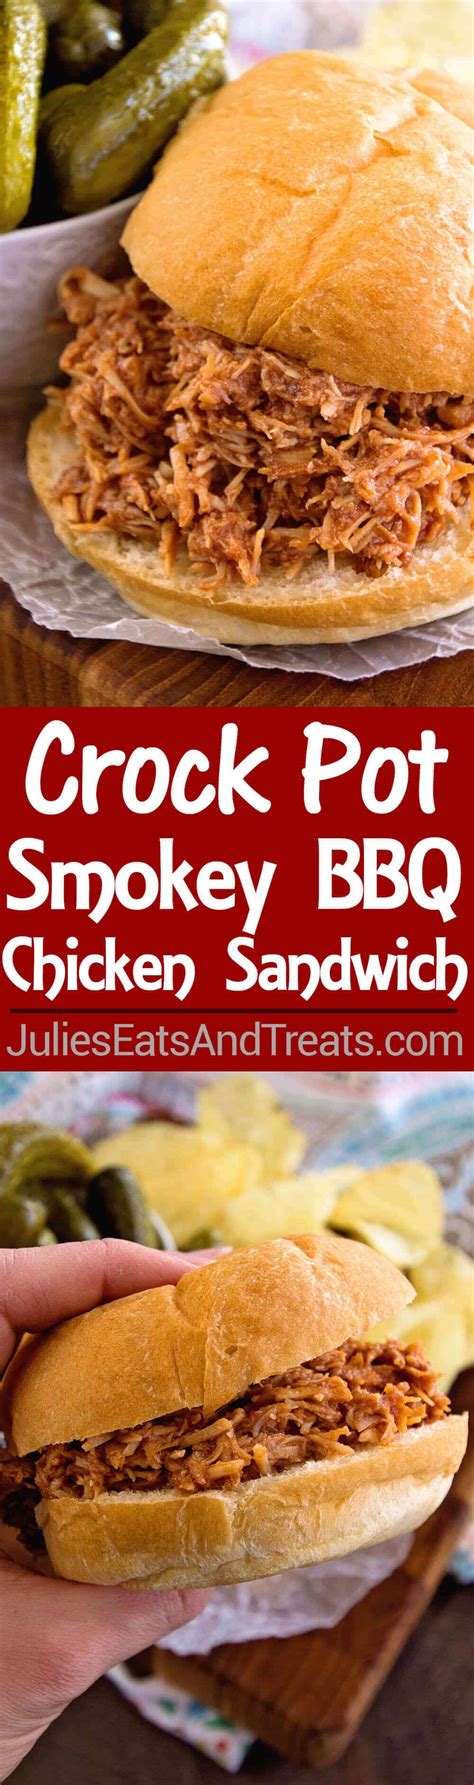 Simmer on low heat for 5 to 10 minutes. Crock Pot Smokey BBQ Shredded Chicken Sandwich Recipe ...